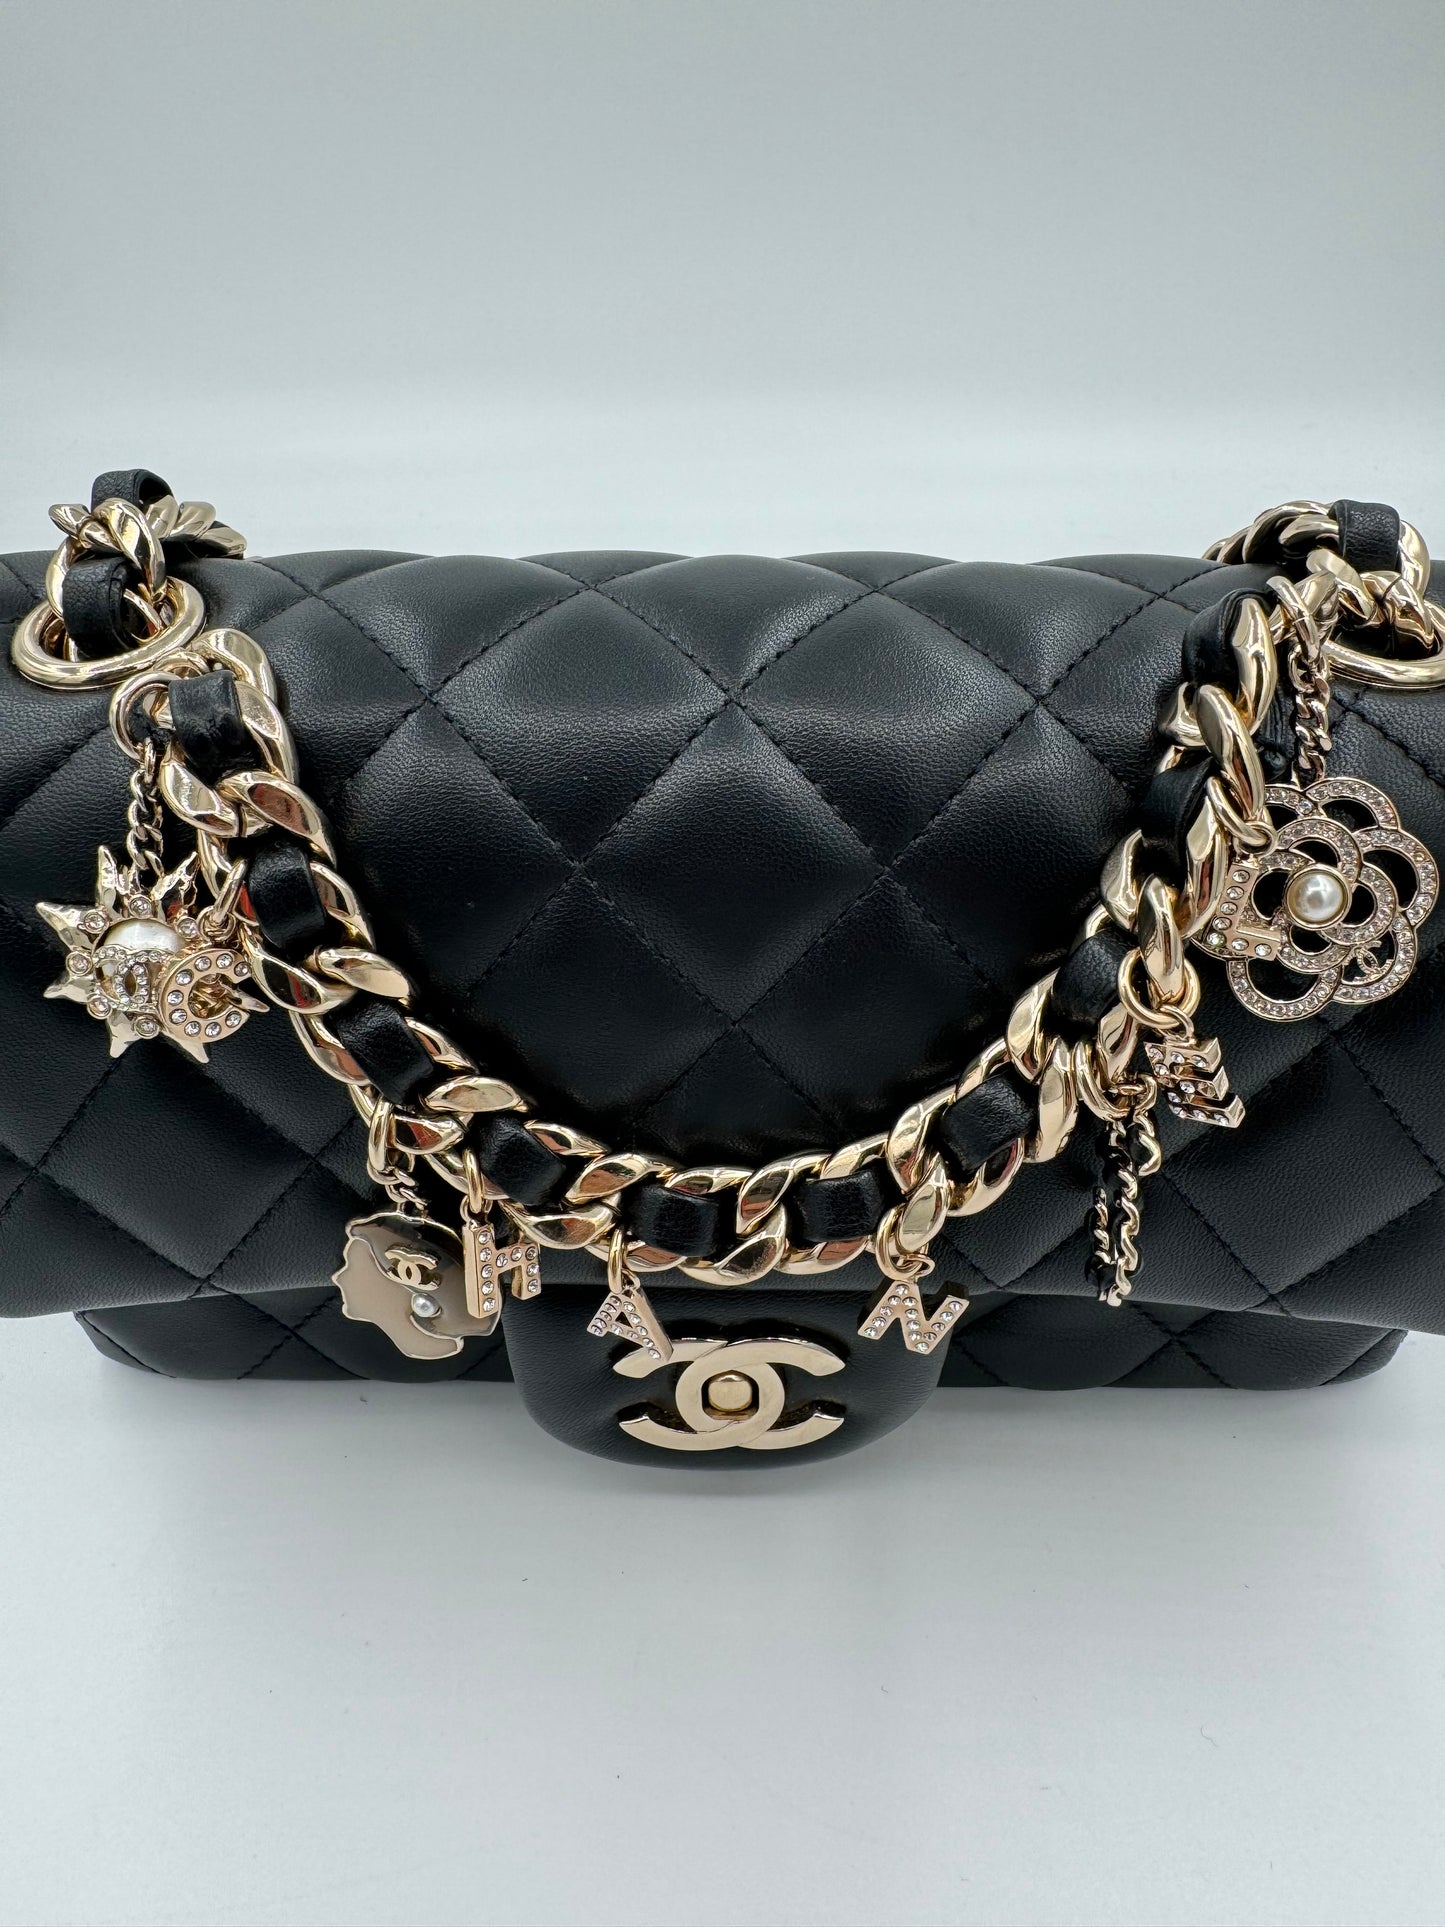 CHANEL Black Quilted Lambskin Mini Rectangular Coco Charms Flap Bag